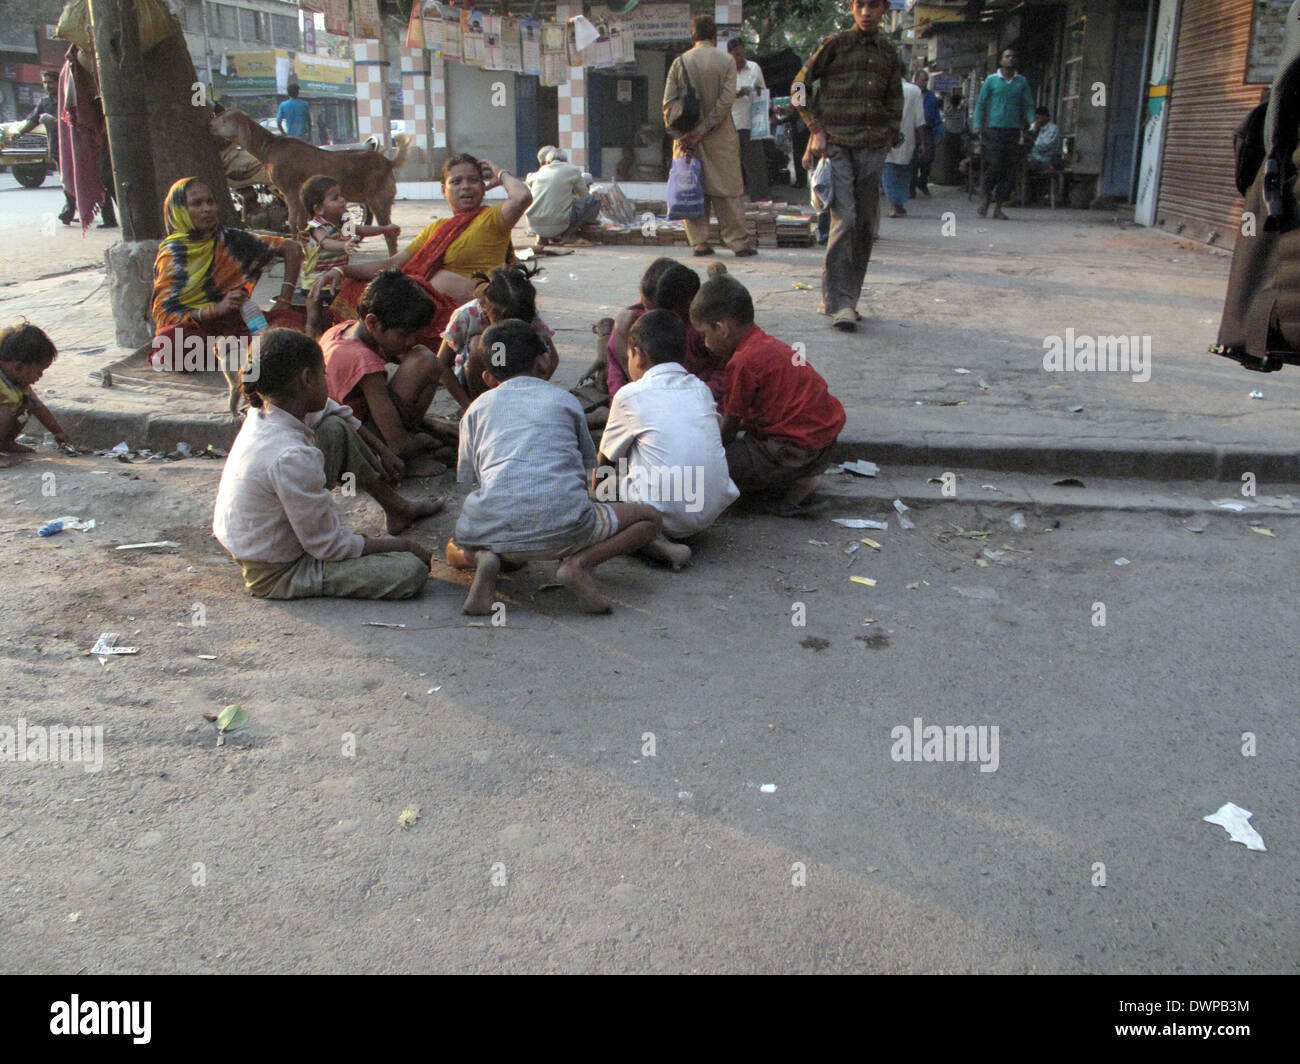 Streets of Kolkata. People live and work on the streets, January 29, 2009. Stock Photo